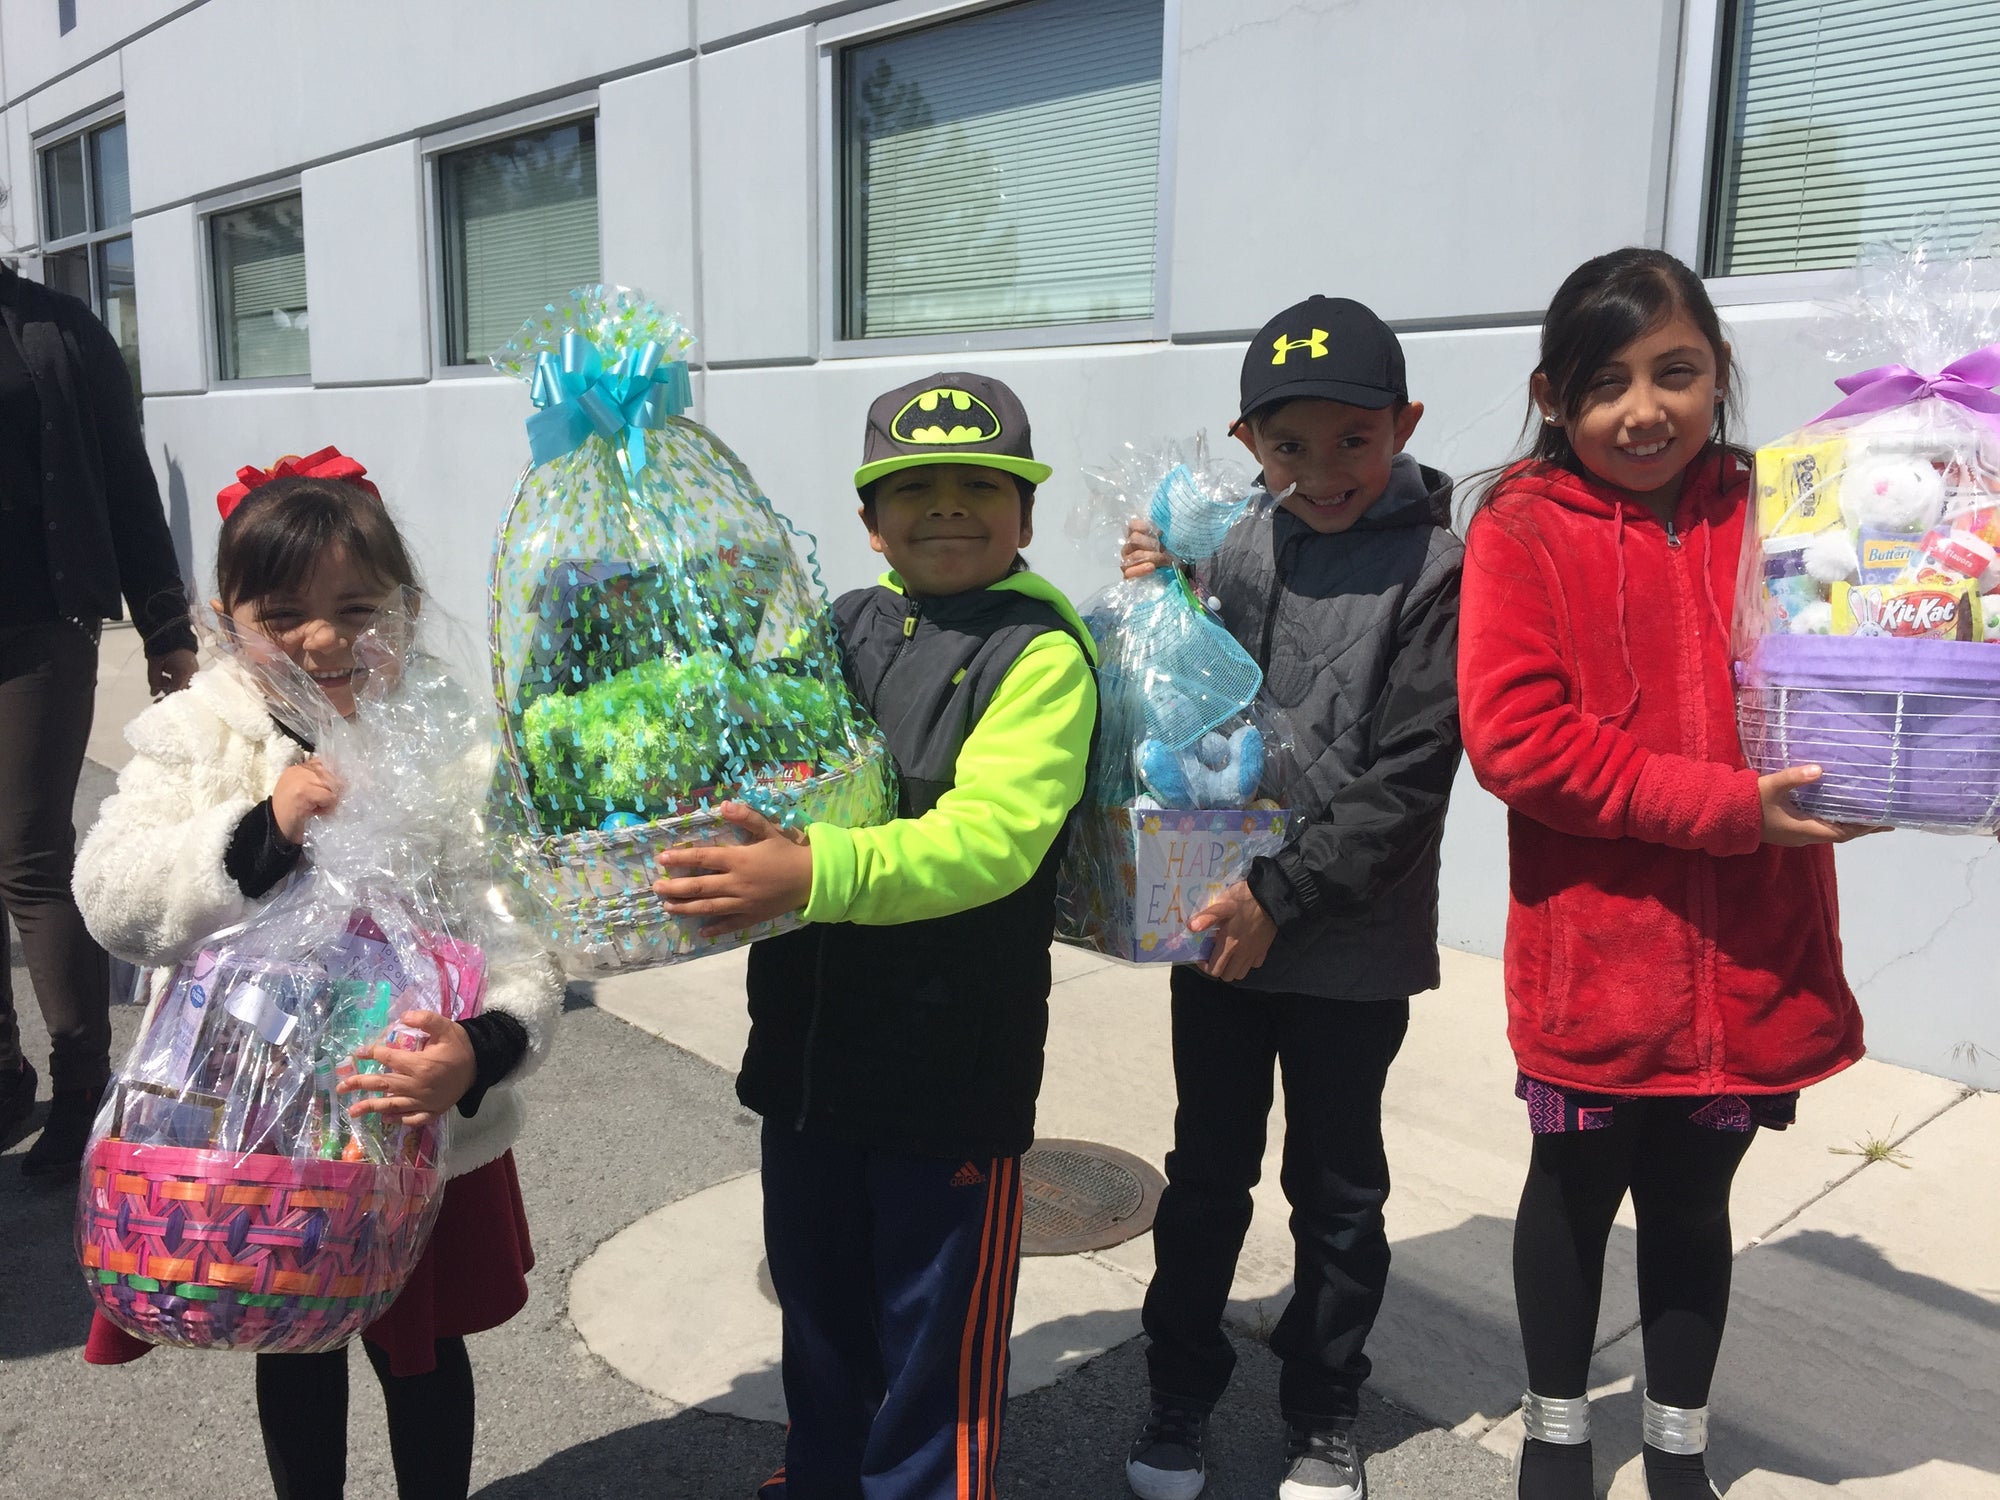 More than 900 Easter baskets given out to children in need